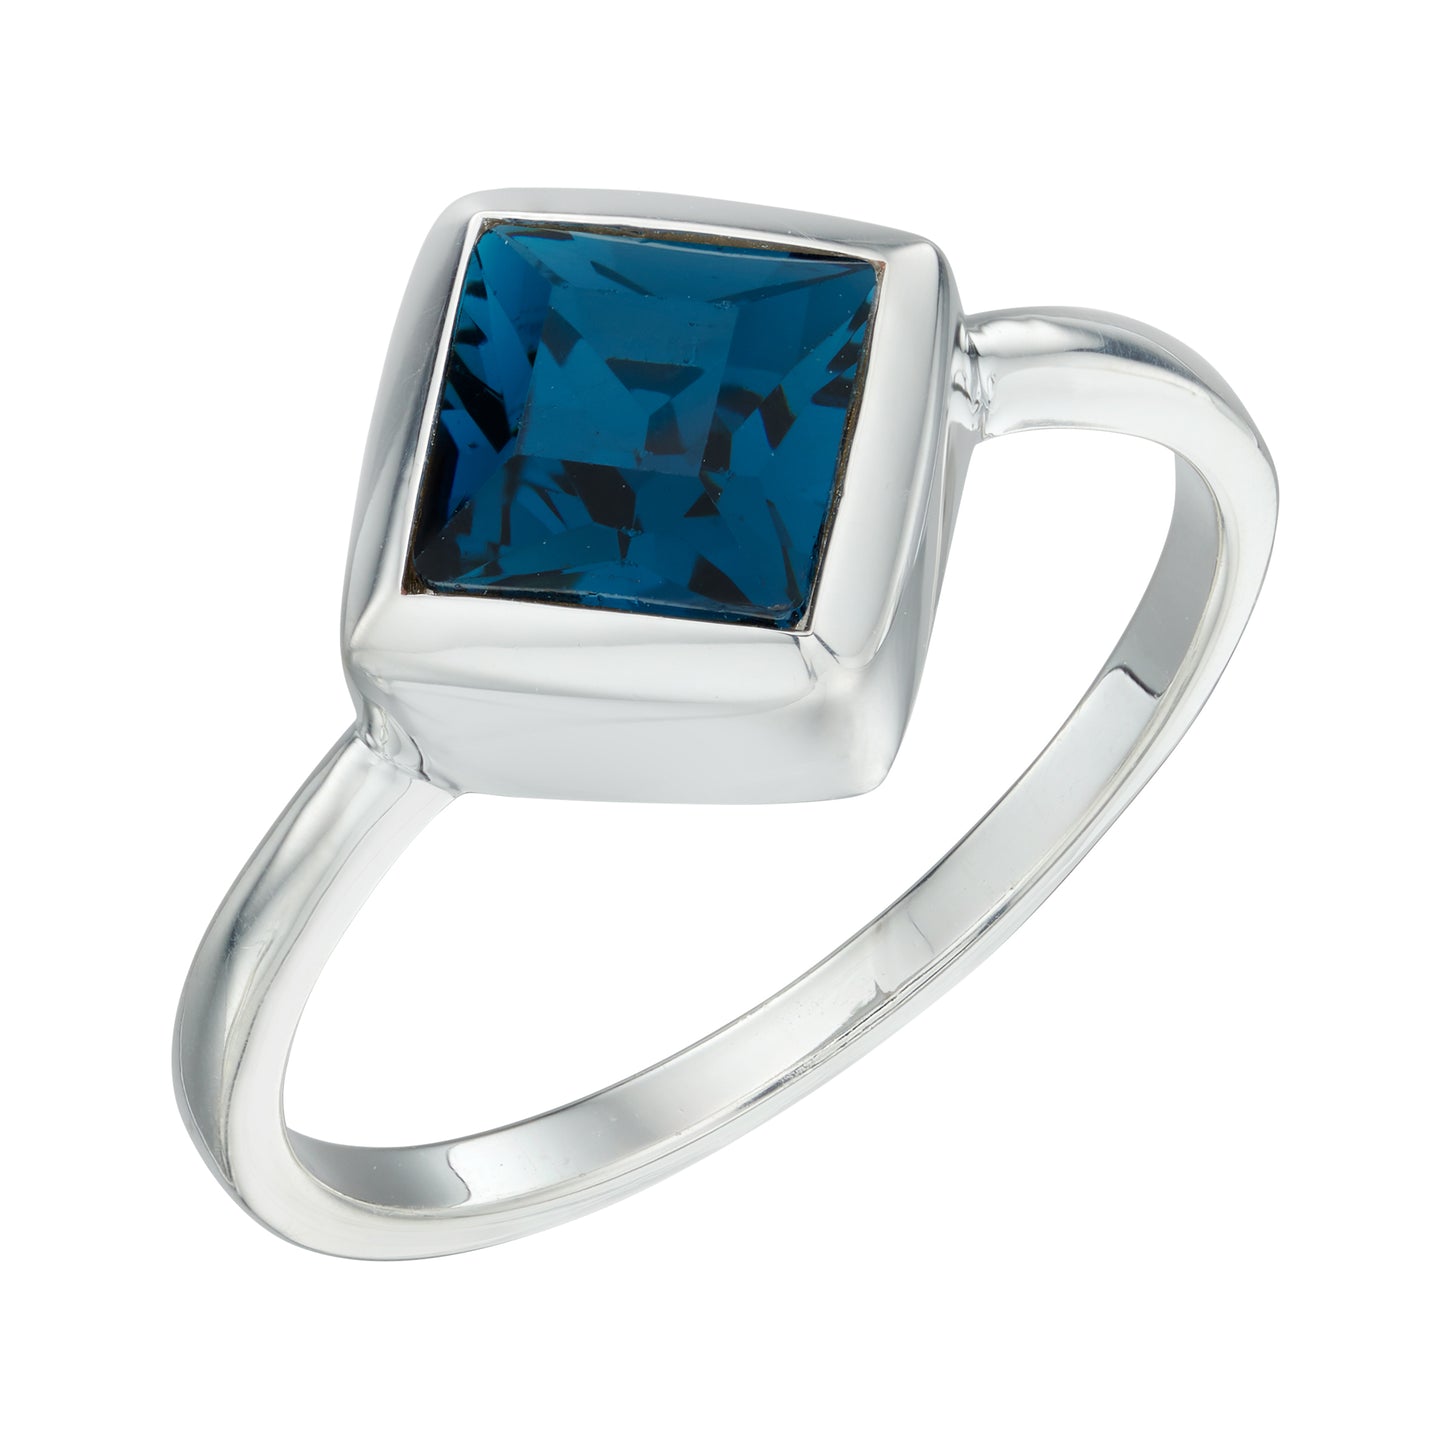 Square Kite Ring With Montana Blue Crystal